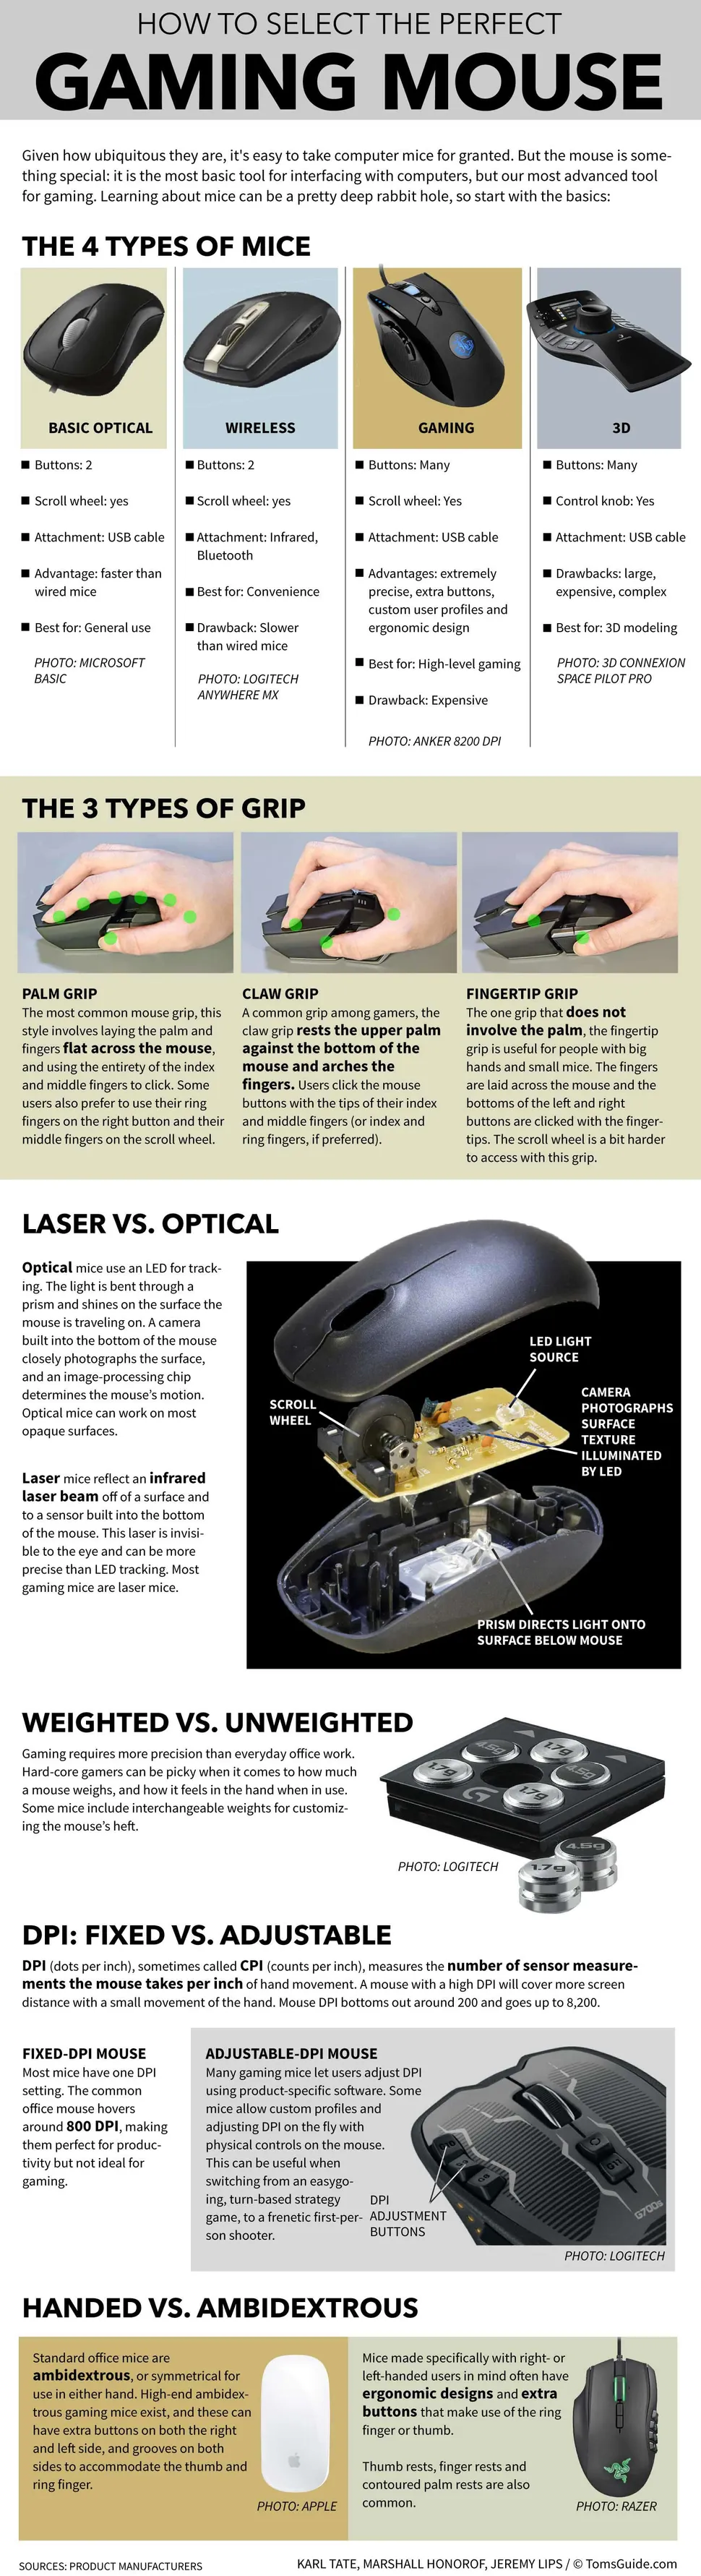 gaming mouse infographic